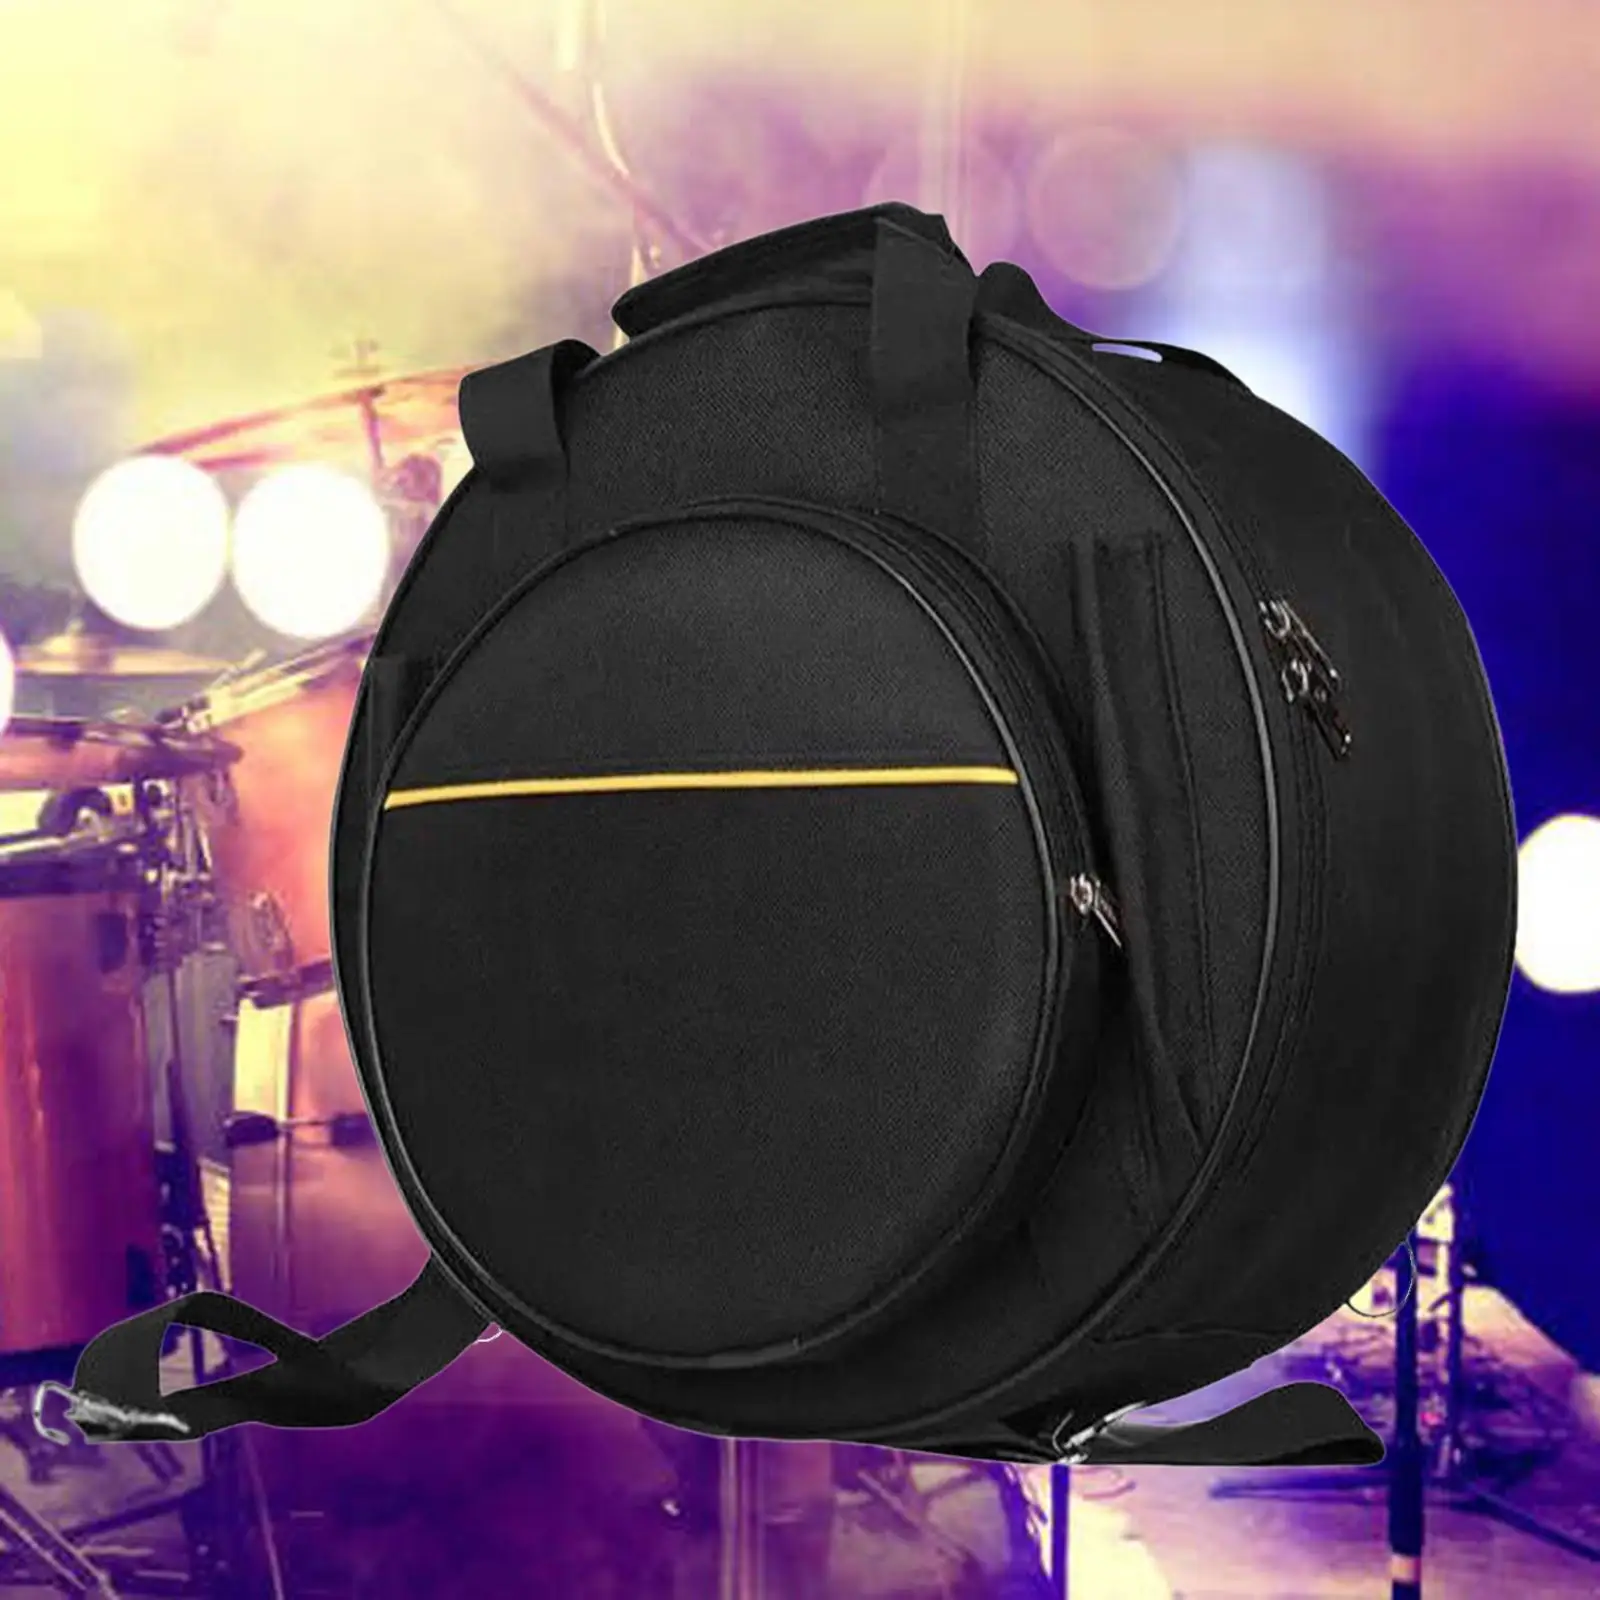 Waterproof Snare Drum Backpack with Carry Handles Percussion Storage Accessory Adjustable Strap Snare Drum Bag for Show